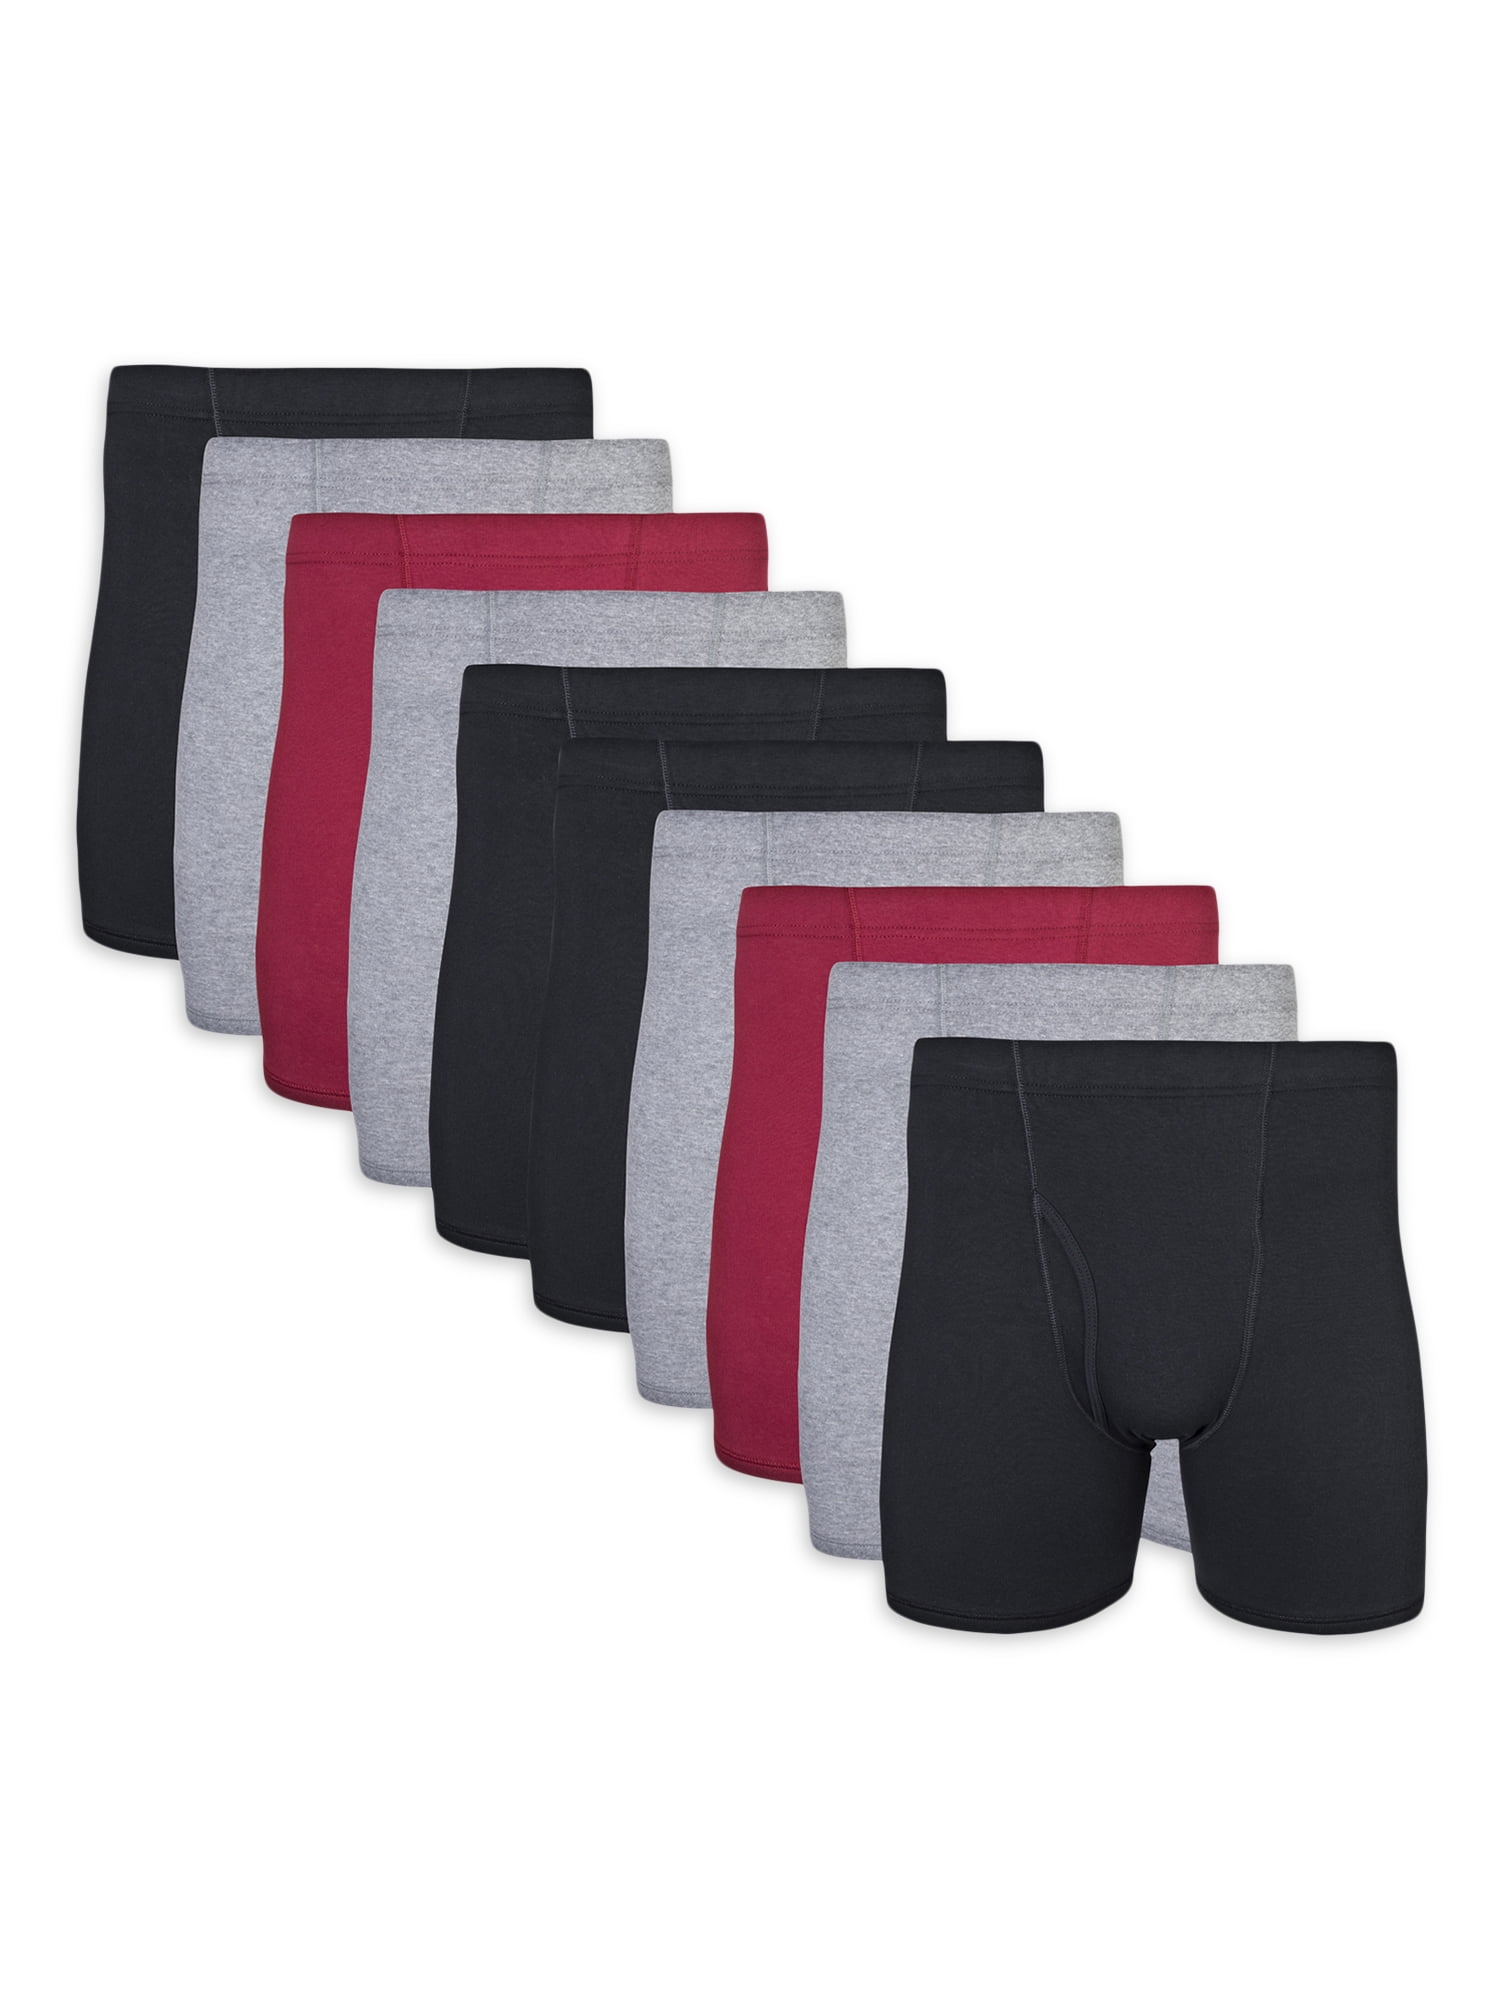 288 Pieces Mens Imperfect Wholesale Gildan Boxer Briefs, Assorted Sizes And  Colors - Mens Underwear - at 